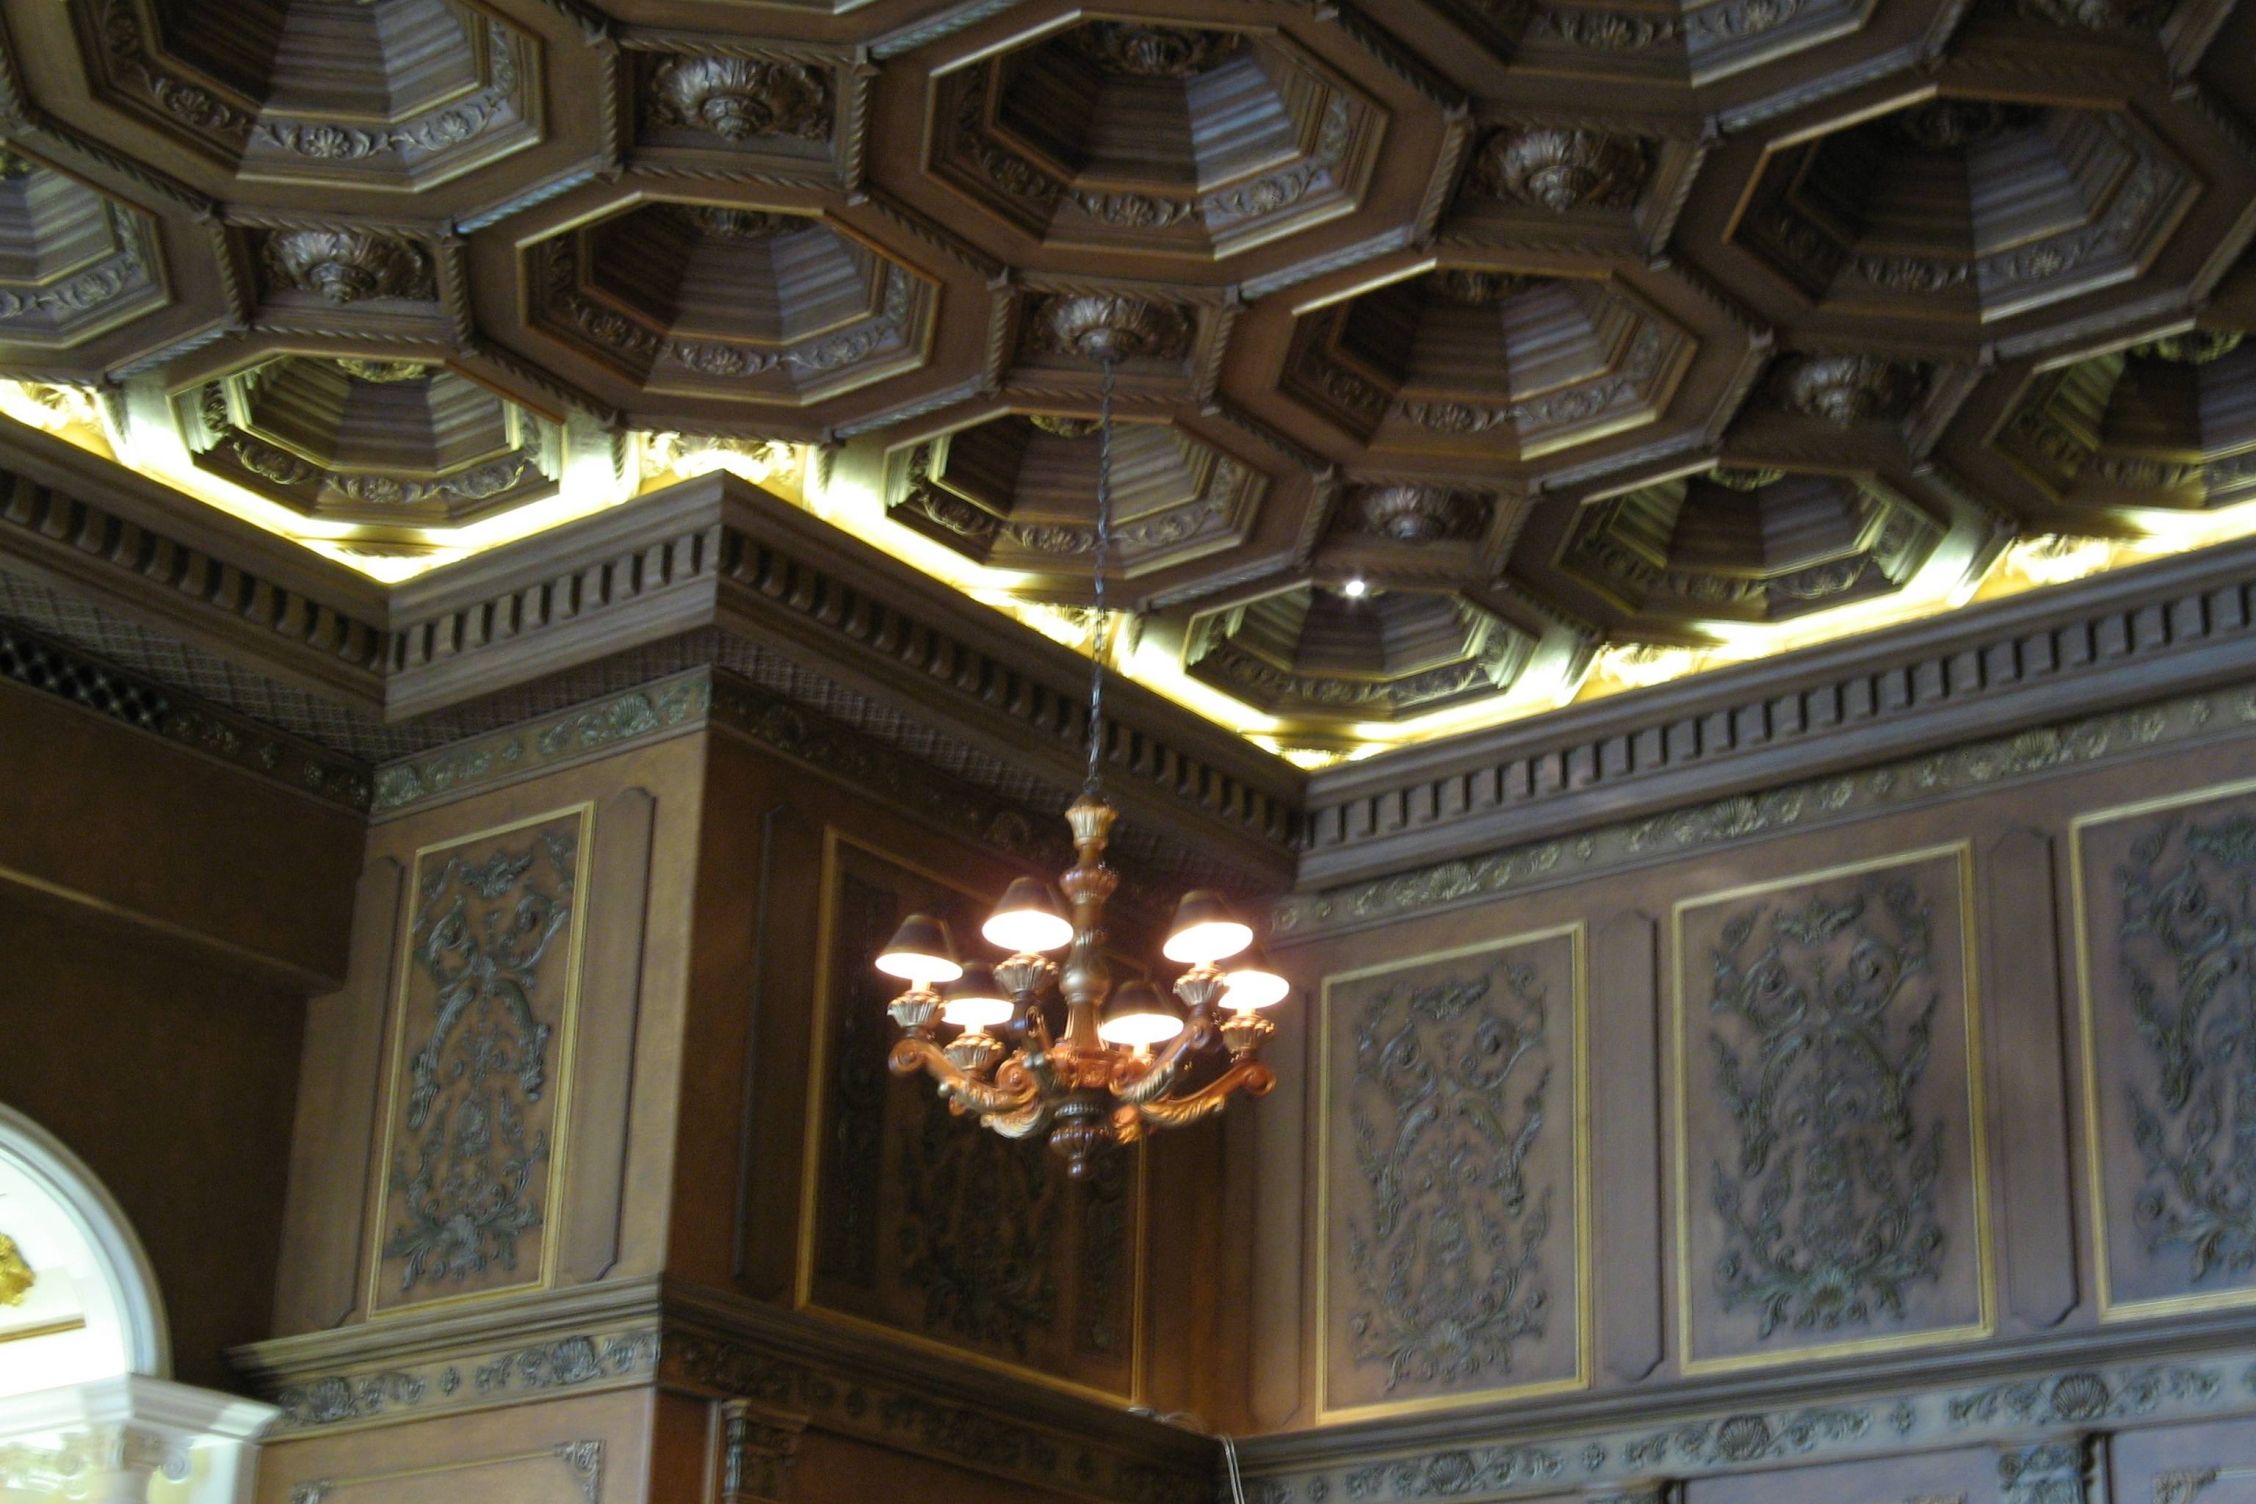 Ceiling with LED lighting fixtures